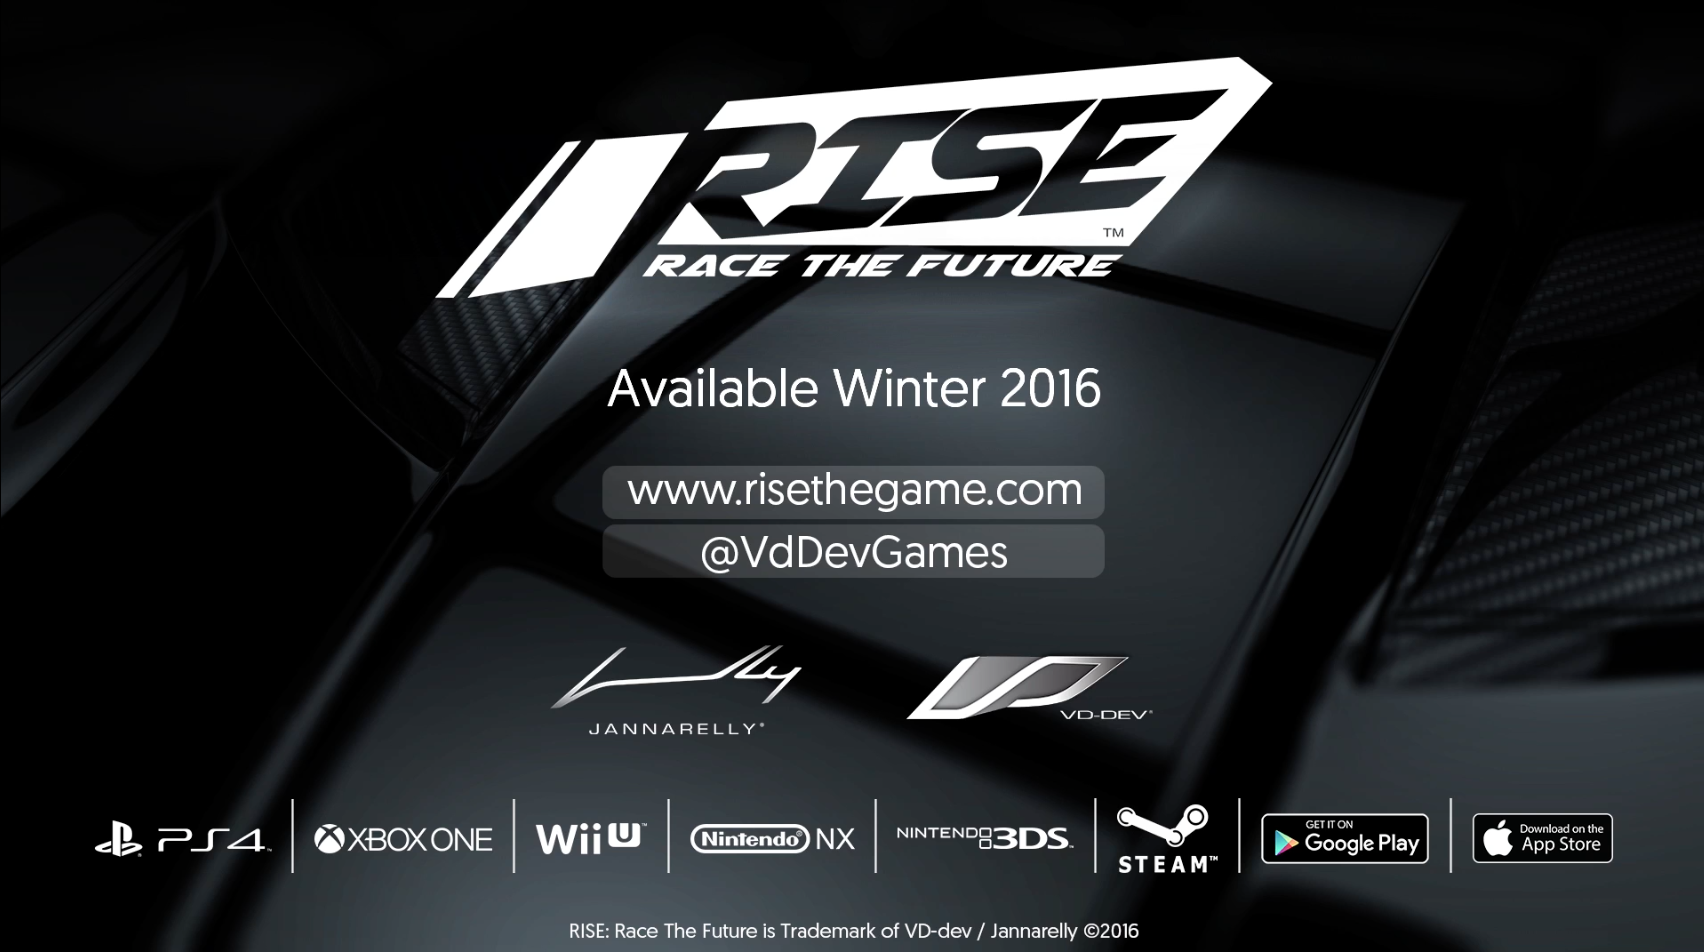 first look of a nintendo nx game watch the rise race the future teaser image 2